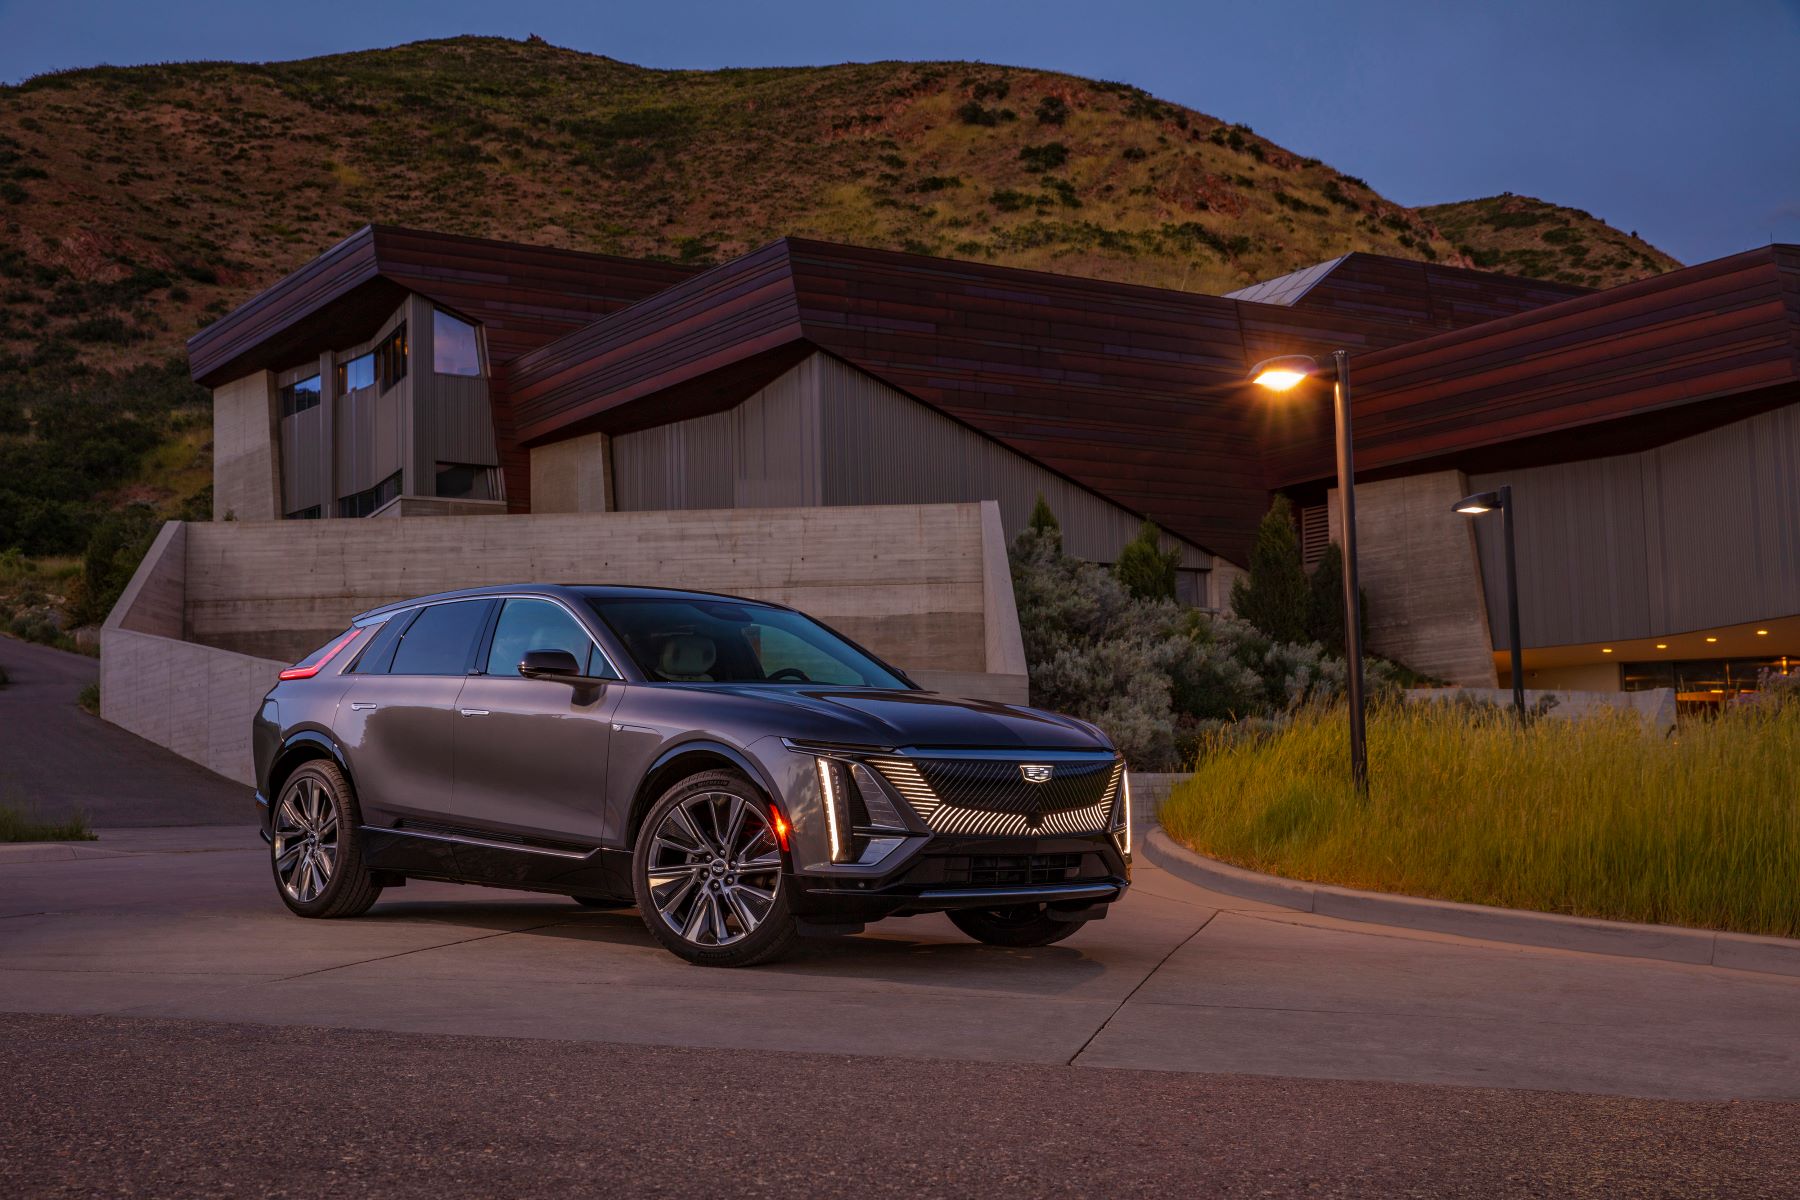 A 2023 Cadillac Lyriq luxury electric SUV parked outside a luxury home under a lamp post/streetlight